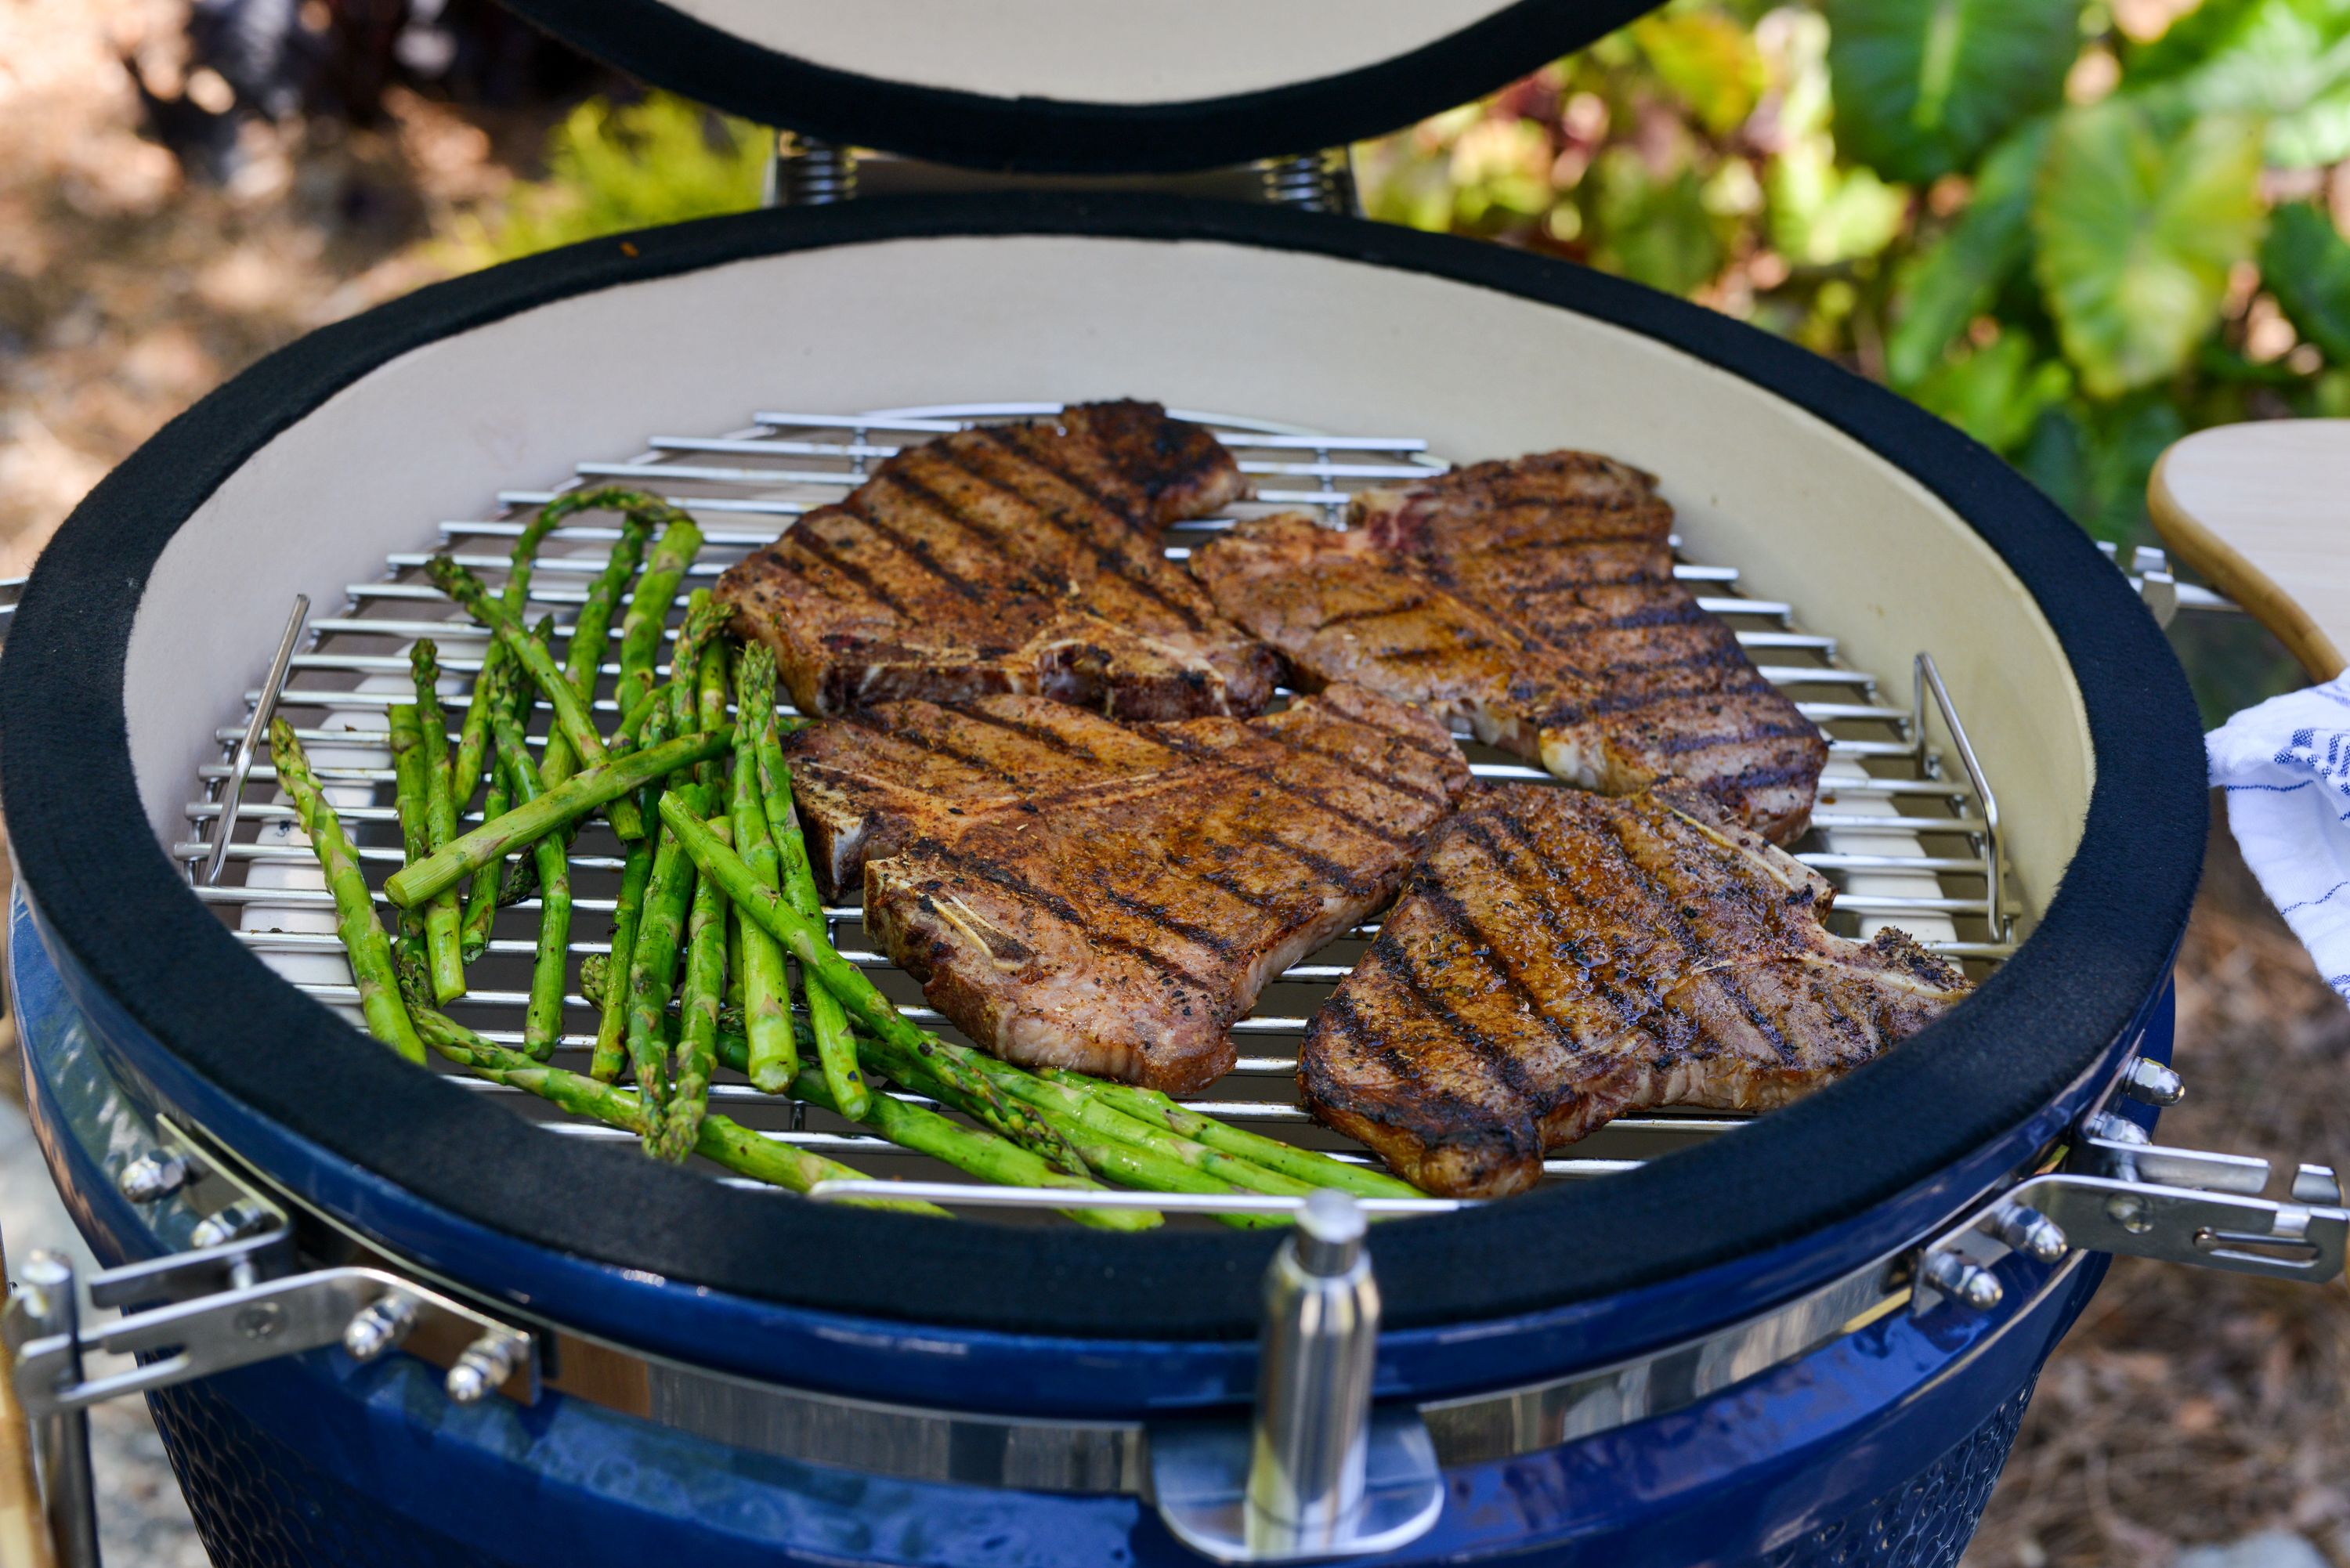 Lifesmart 15" Blue Kamado Ceramic Grill Value Bundle Includes Electric Starter Cooking Stone and Cover - image 3 of 15